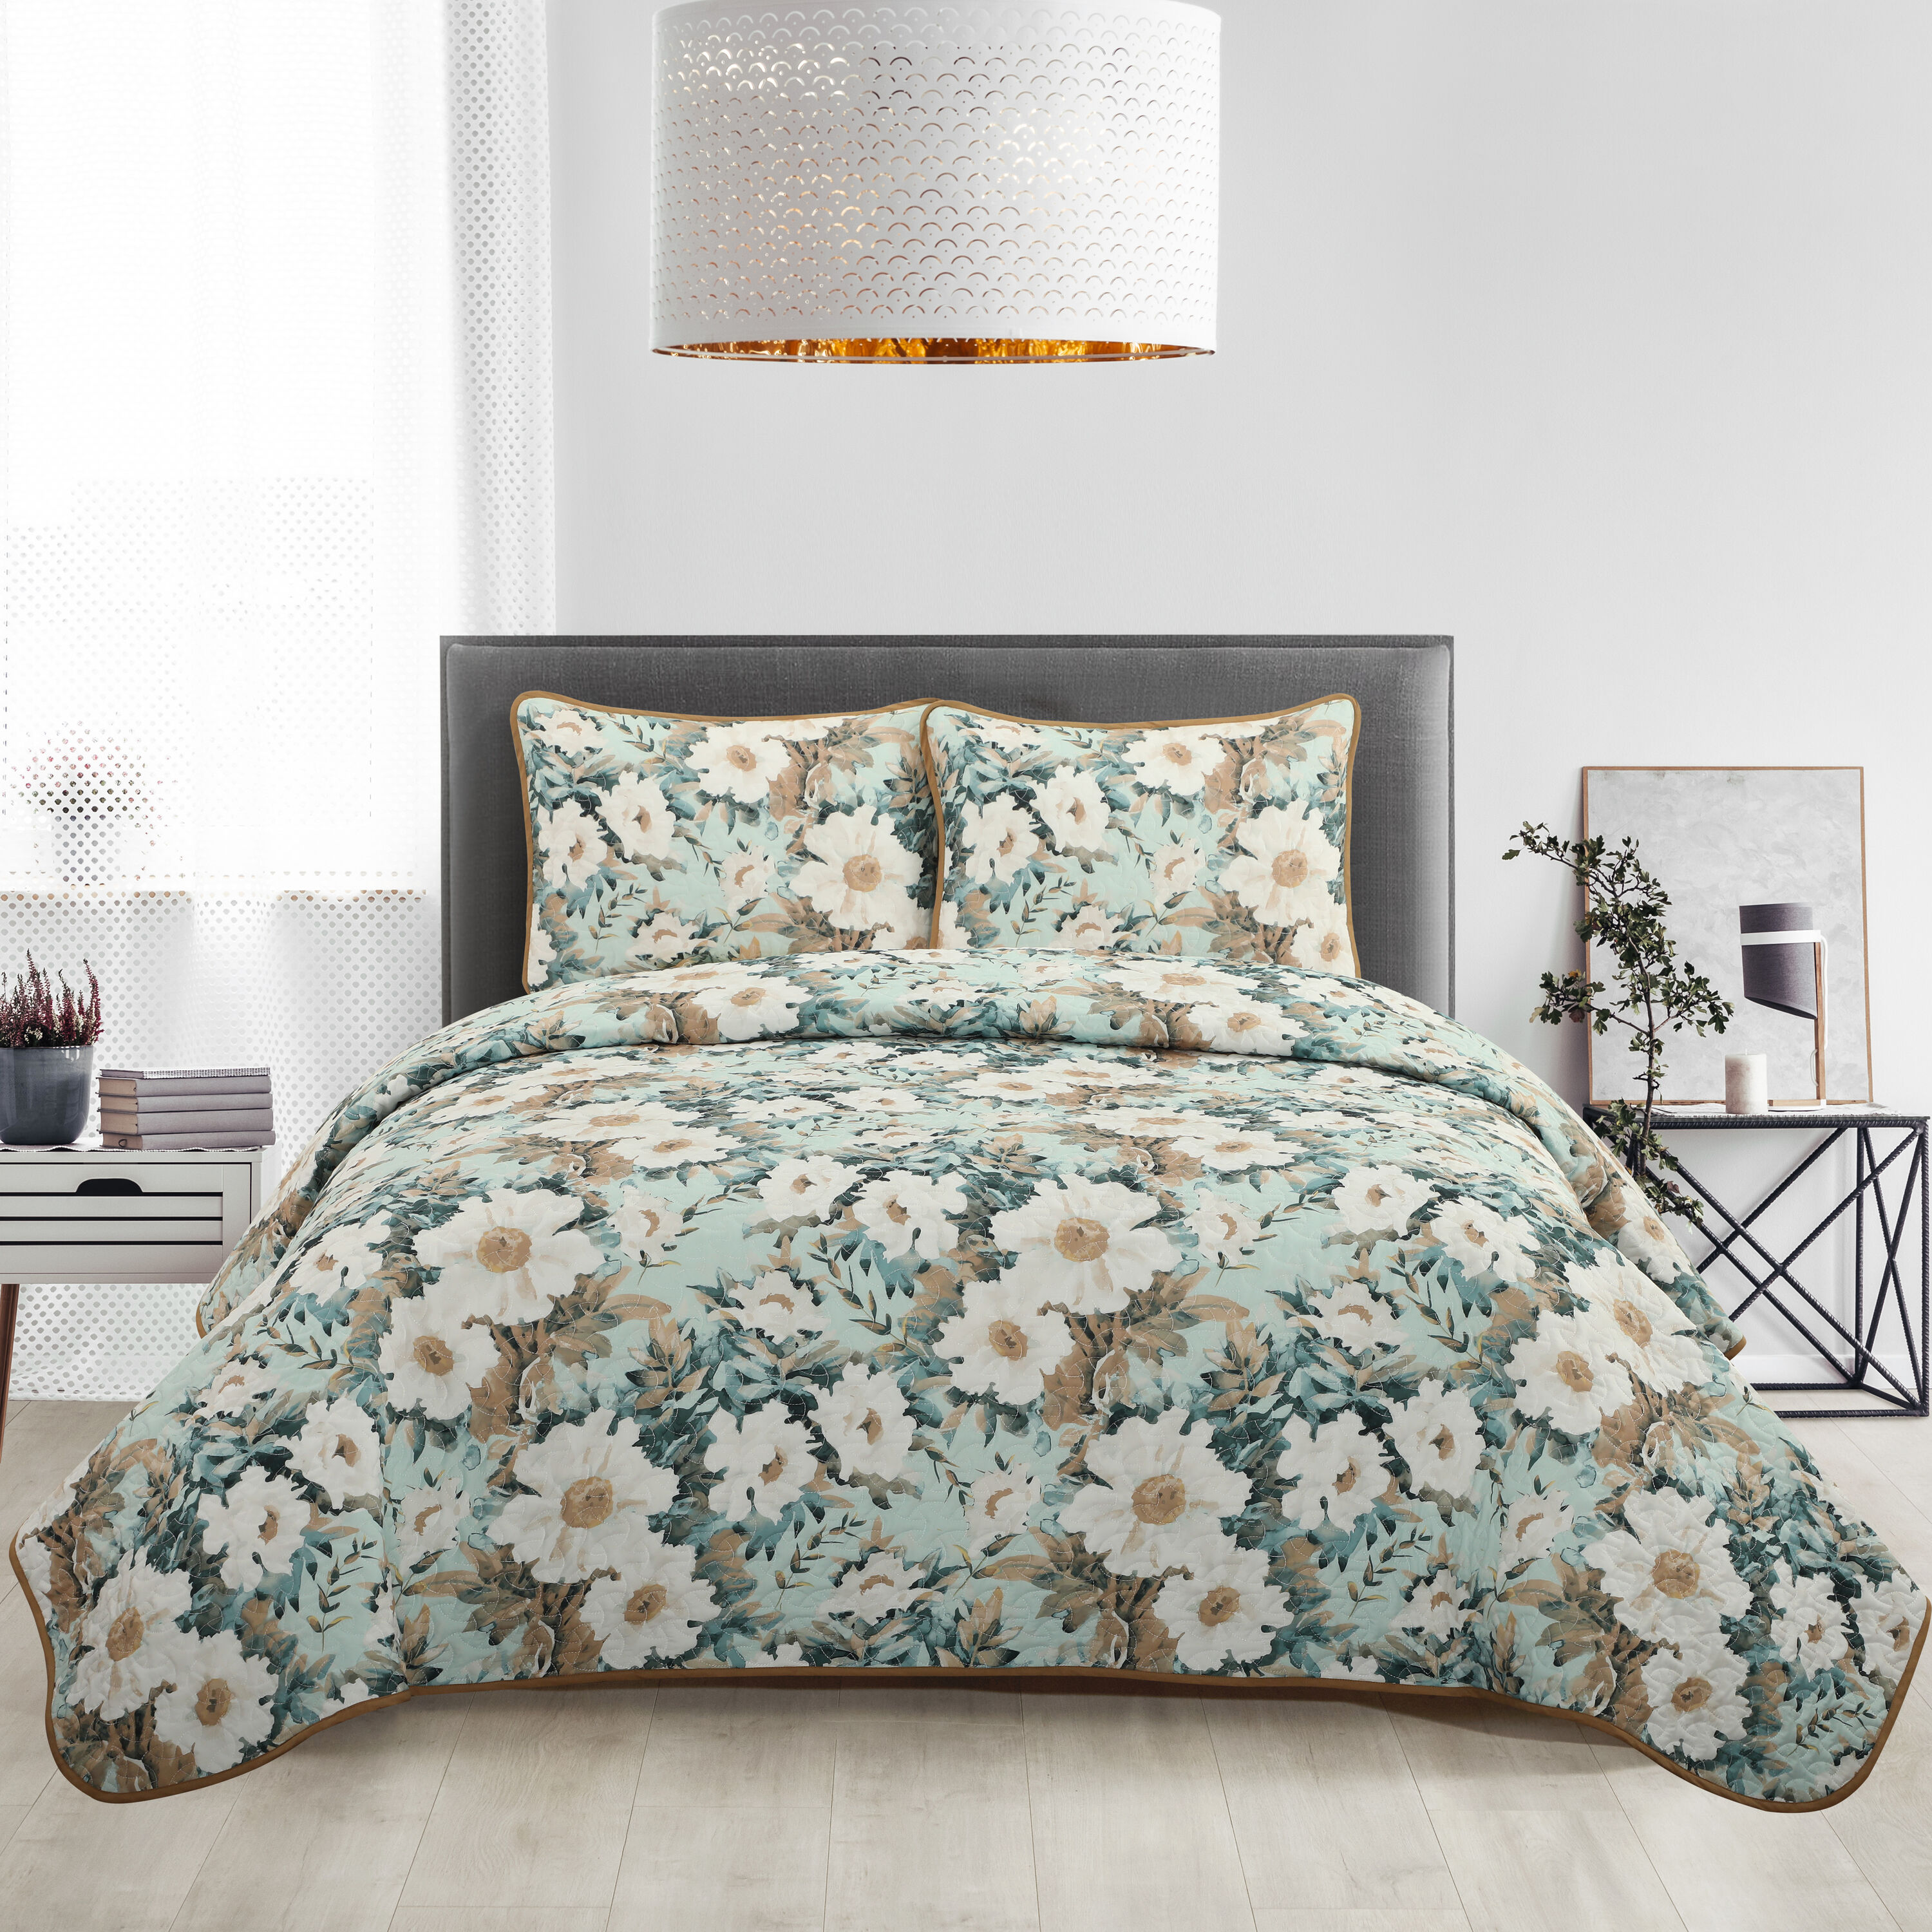 allen + roth allen + roth Montclair Reversible Comforter Set Serenity  Damask Full/Queen Comforter (Cotton with Polyester Fill) in the Comforters  & Bedspreads department at